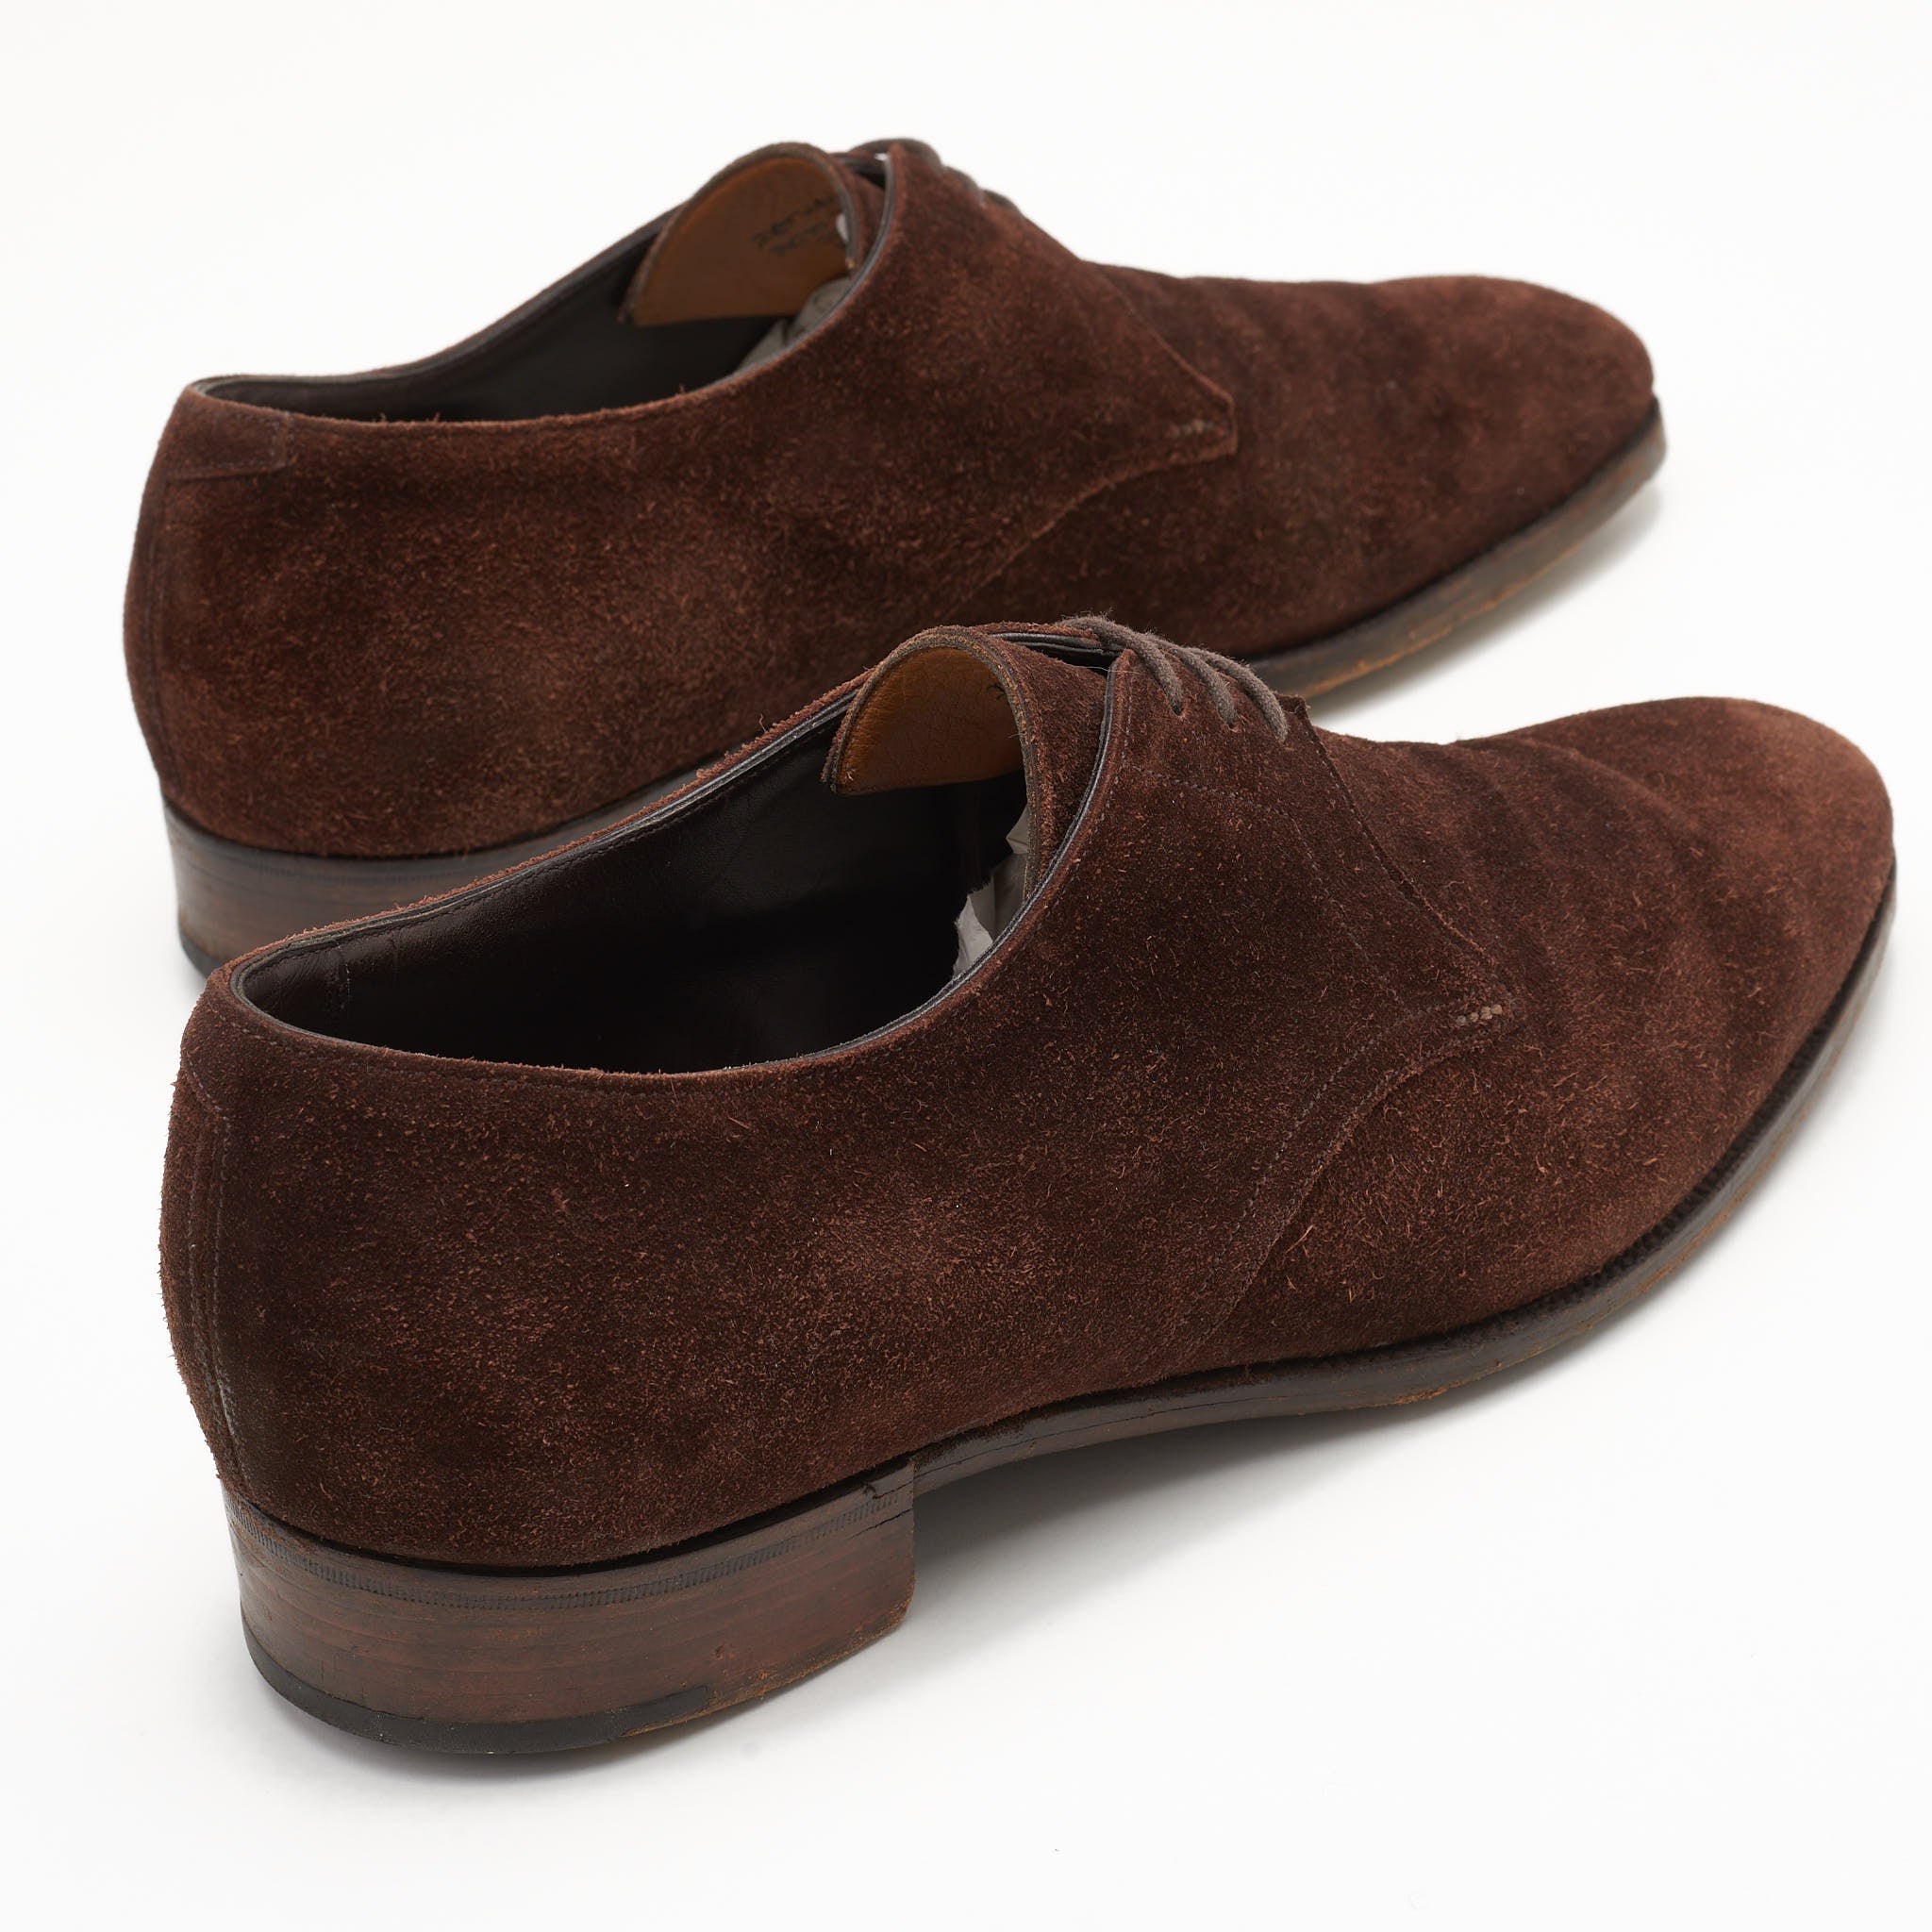 GAZIANO & GIRLING "Derwent" Brown Suede Derby Shoes UK 7E US 7.5 Last DG70 GAZIANO & GIRLING